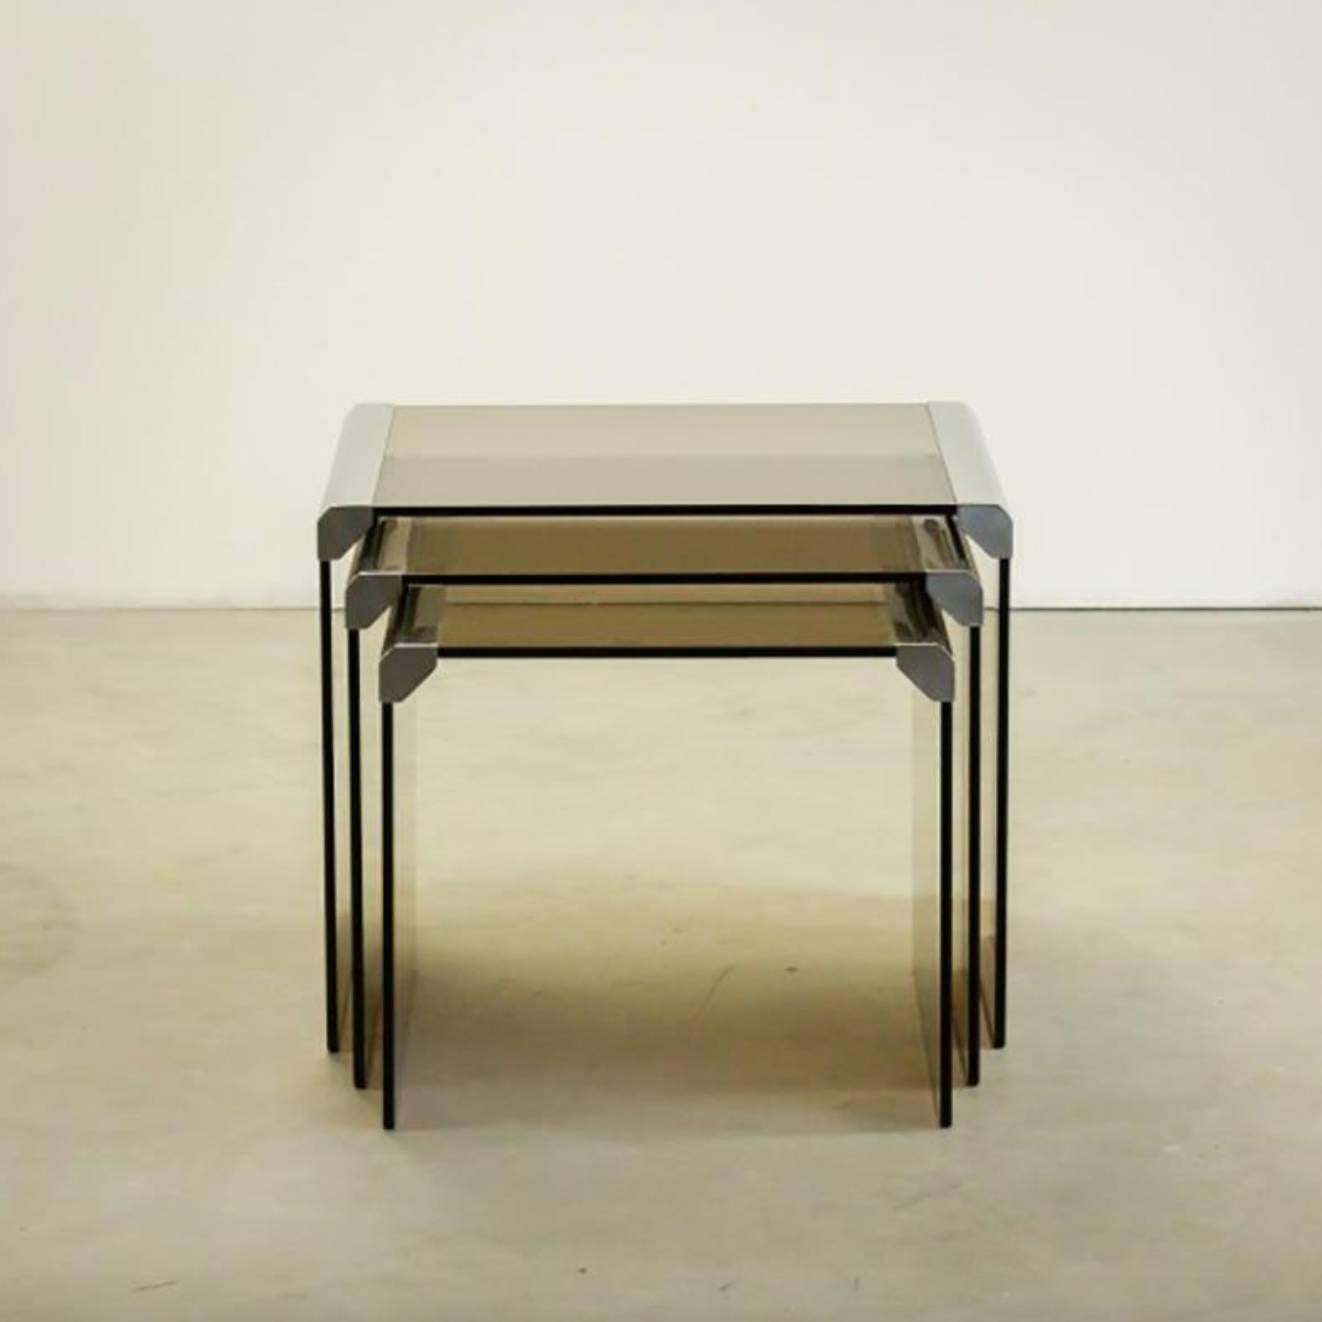 Pierangelo Galloti
Three Gigognes side tables, Gallotti & Radice manufacturer, circa 1980
Smoked glass, chrome
Excellent original condition
The smallest table measures H 34 cm x D 41 cm x W 38 cm.
The middle table measures H 37 cm x D 41 cm x W